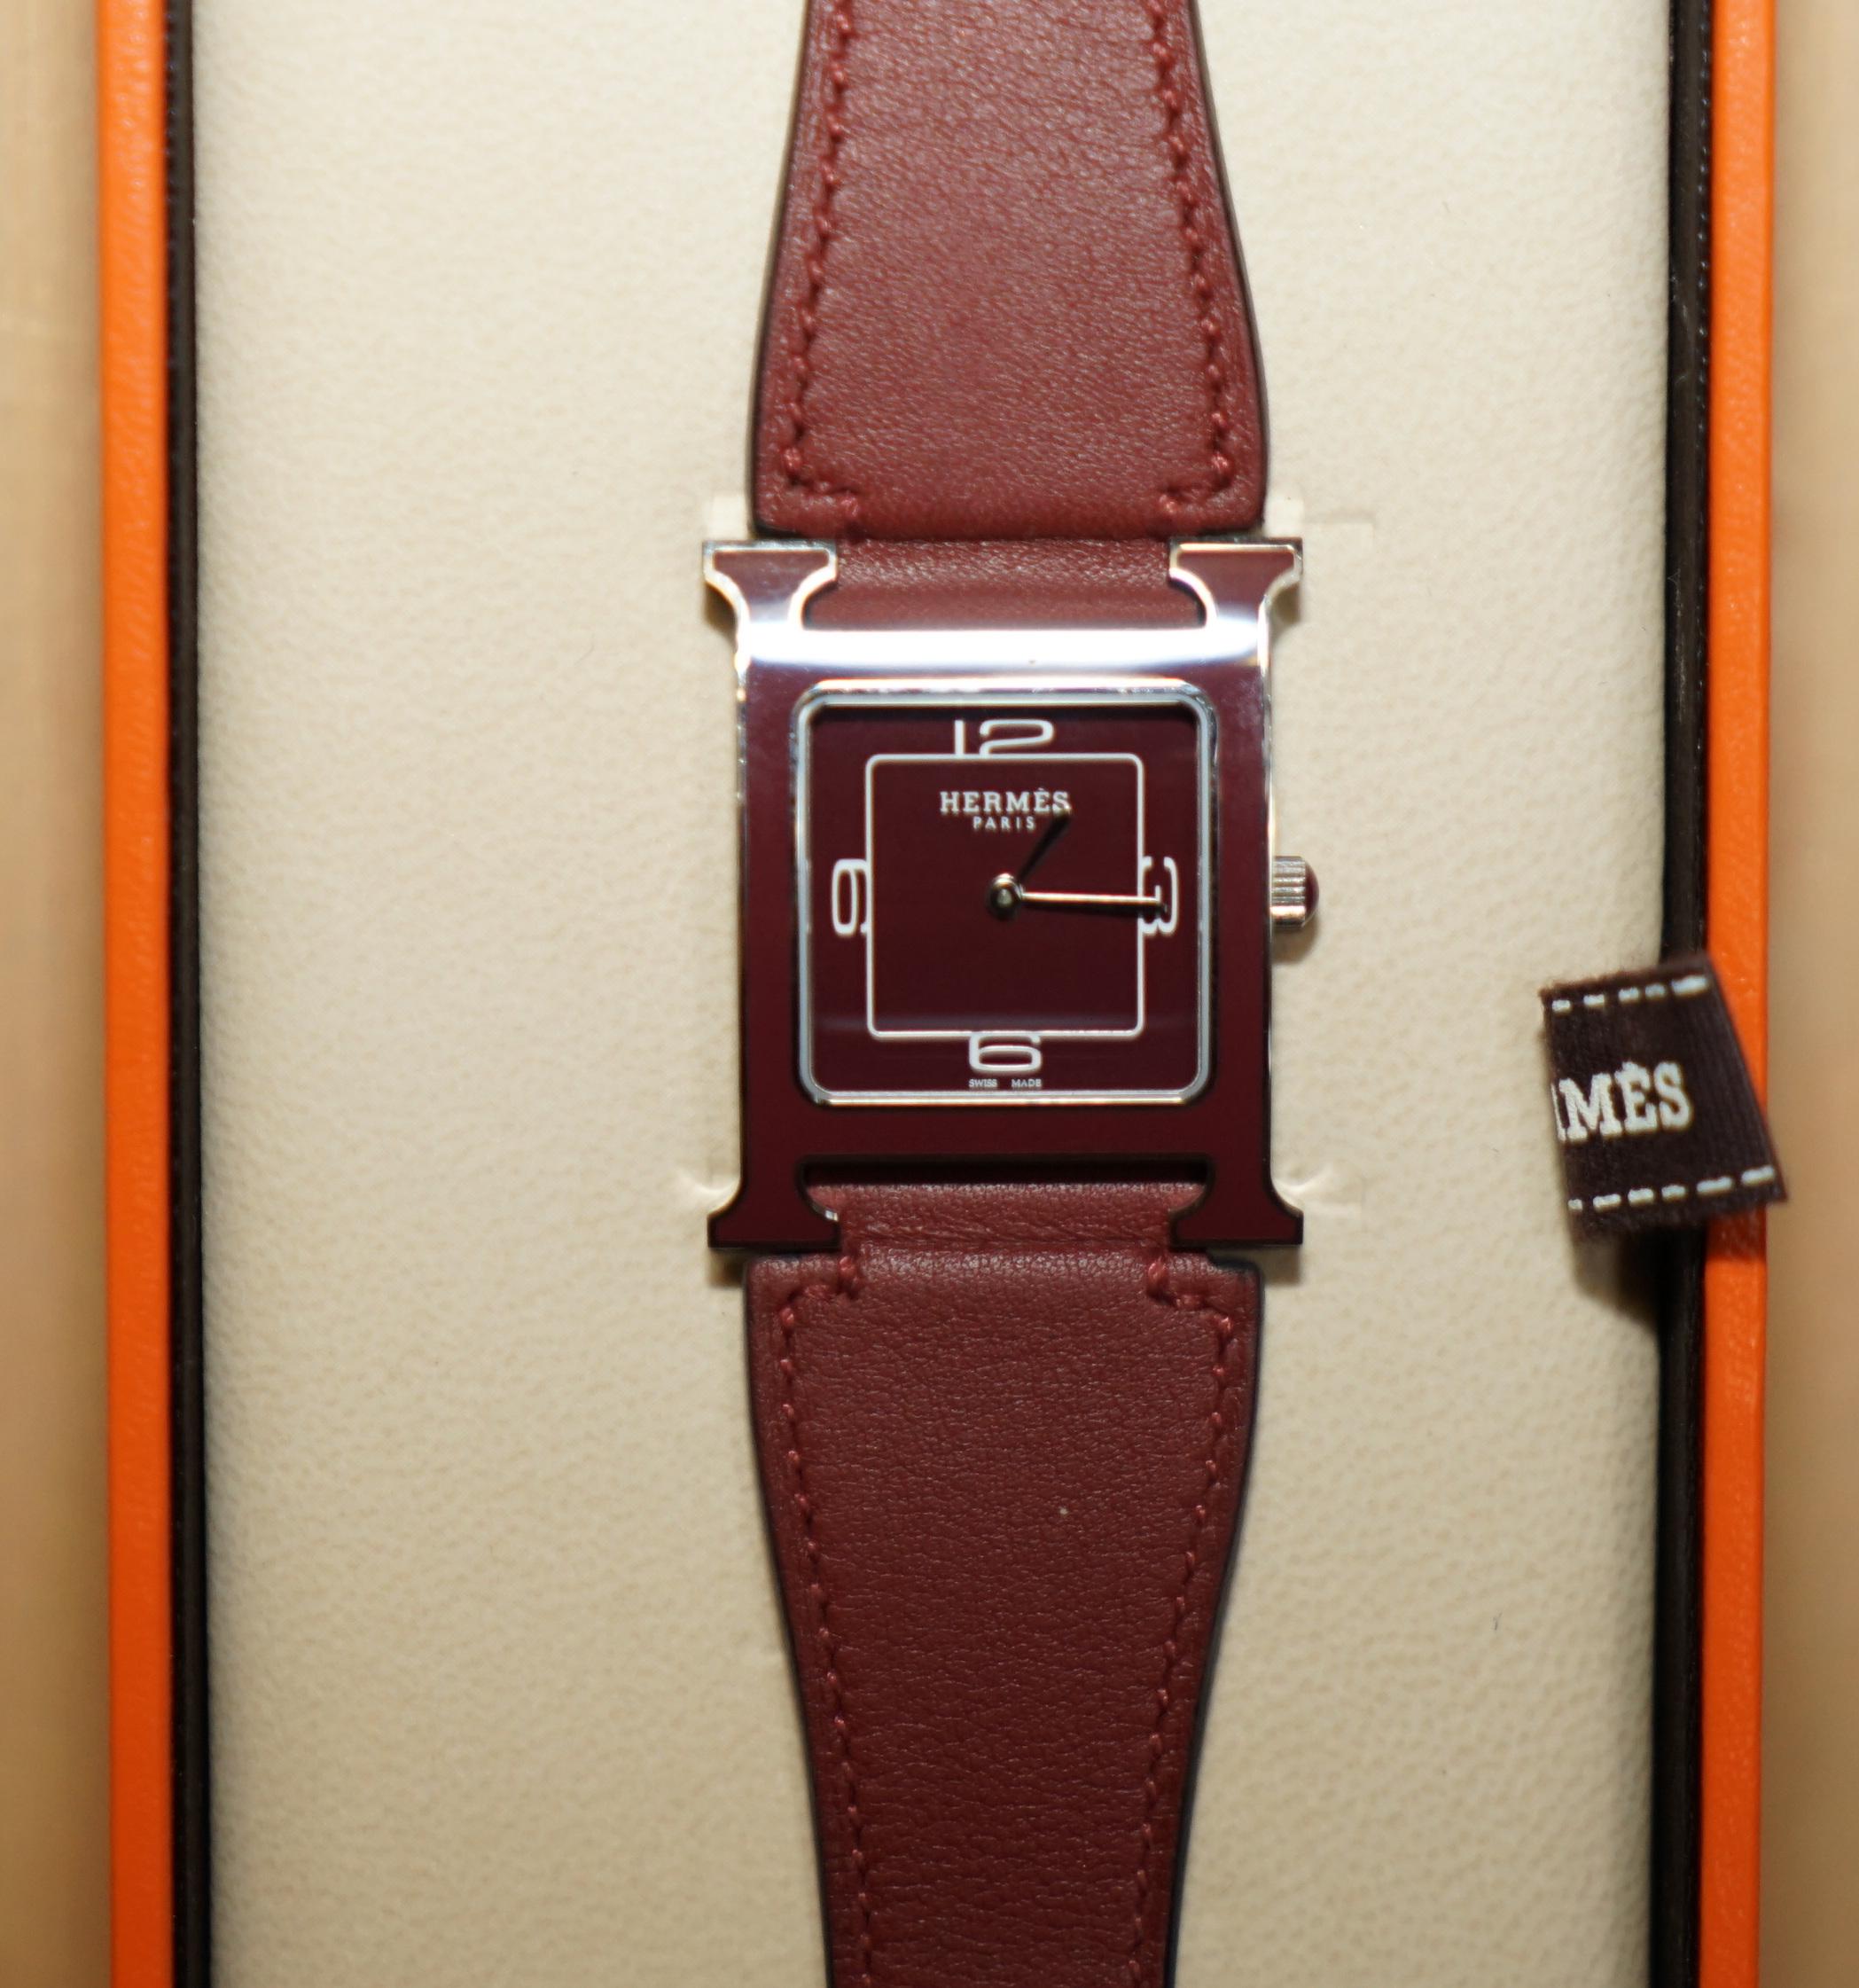 BRAND NEW IN THE ORIGiNAL BOX WITH PAPERWORK HERMES PARIS LTD EDITION H WATCH For Sale 2